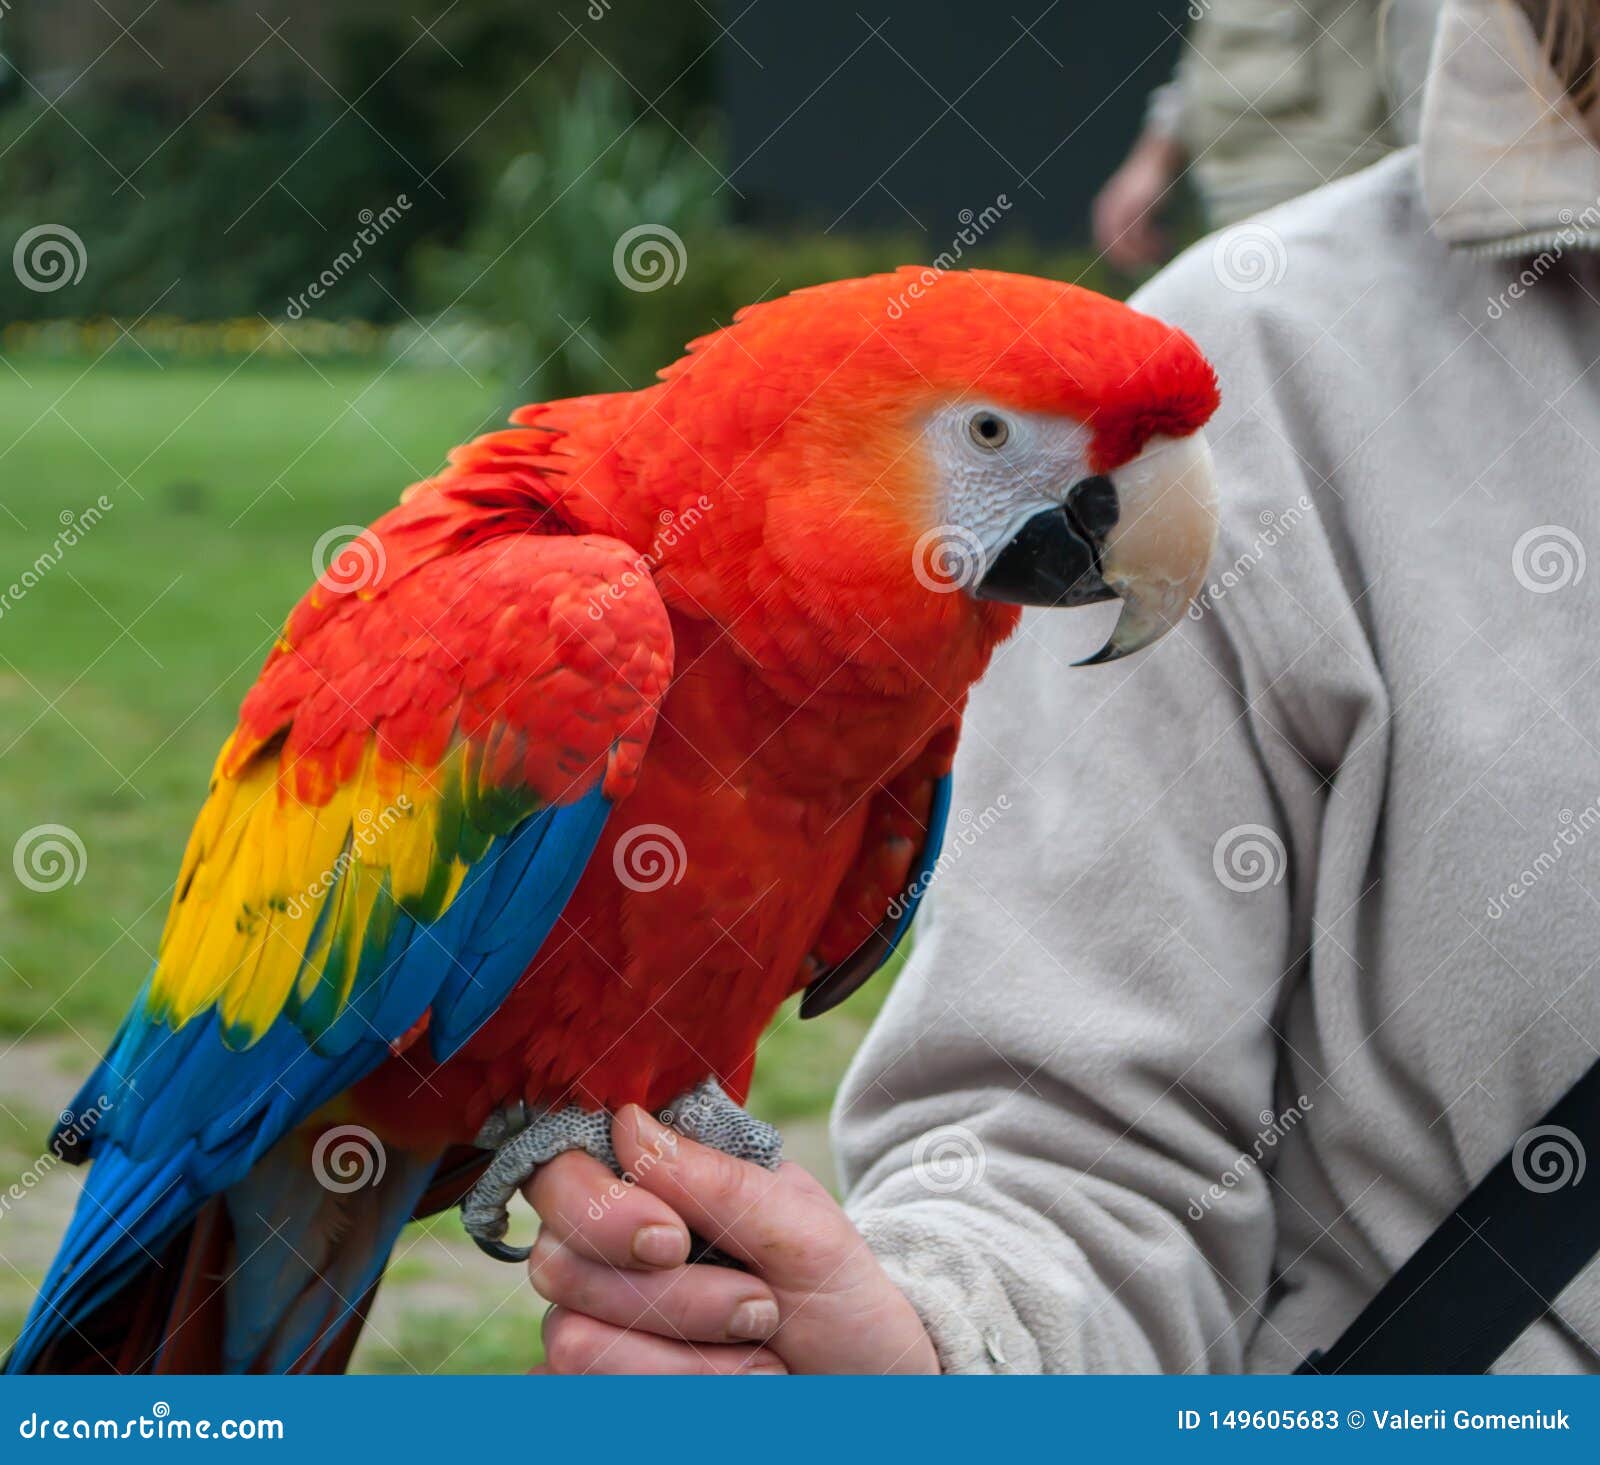 Close-up of the Scarlet Macaw, Macao, Sitting on the Stock Image - Image of colorful, macaw: